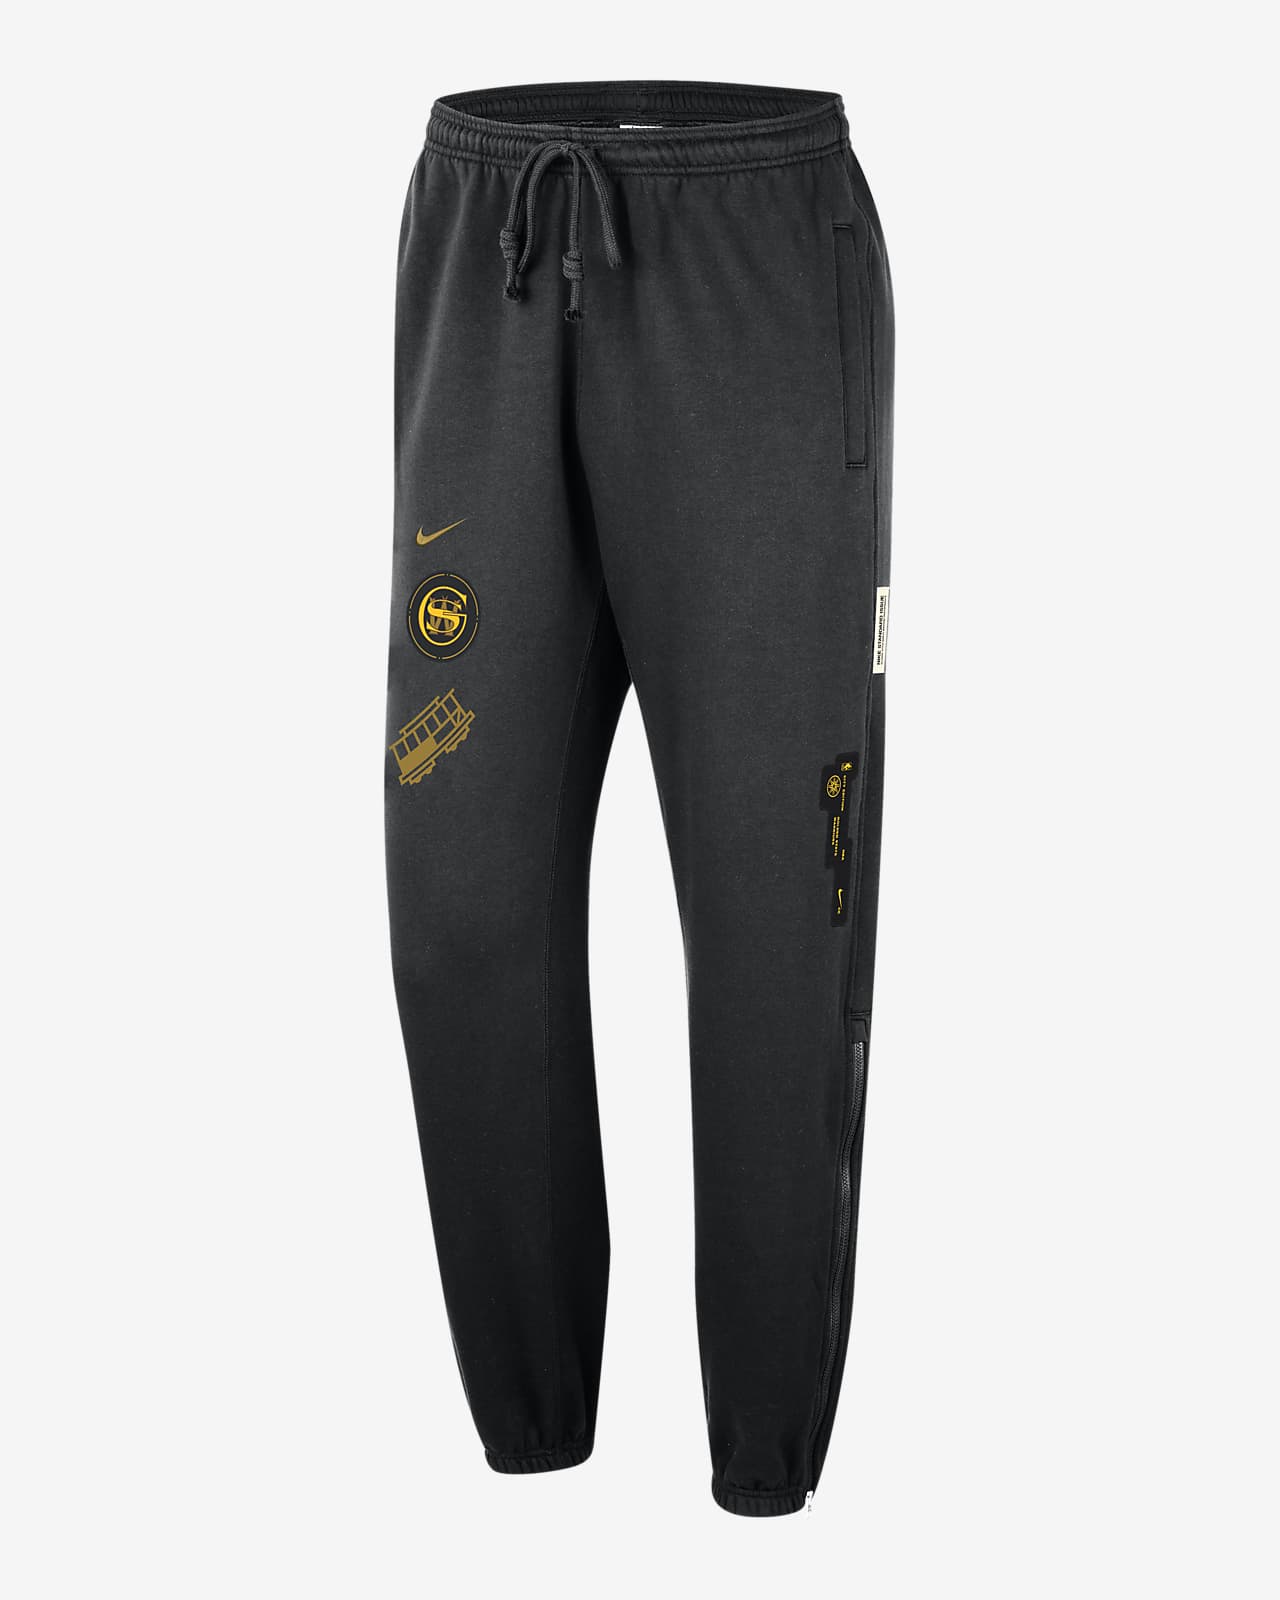 Golden State Warriors Standard Issue City Edition Men's Nike NBA Courtside Pants